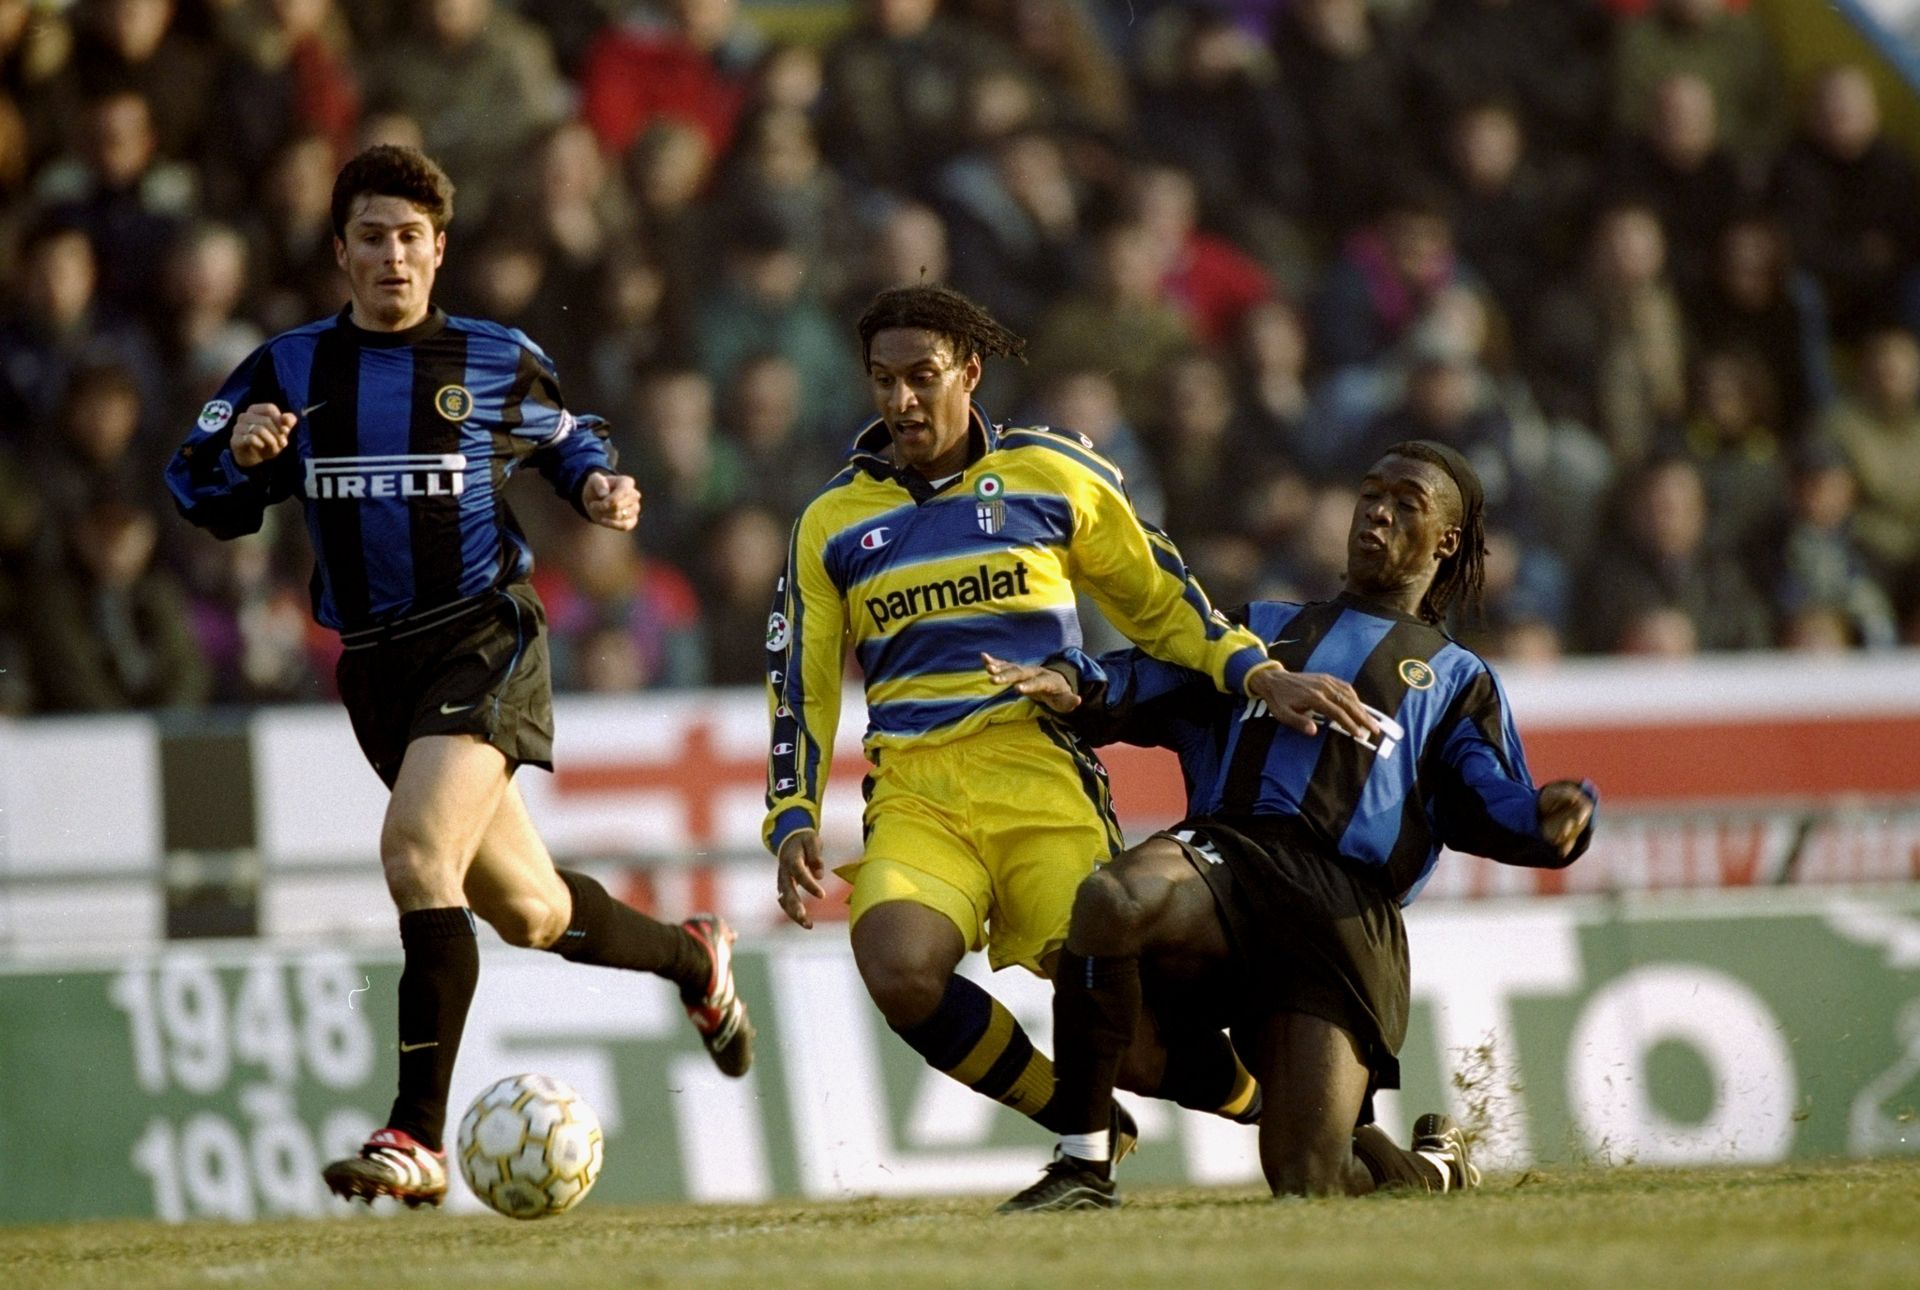 <p>                     Ousmane Dabo started his career at Rennes, but went on to spend the majority of his playing days in Italy, where he represented Inter, Vicenza, Atalanta, Parma and Lazio.                   </p>                                      <p>                     After joining Parma from Inter in a €15.5m move in 1999, the midfielder struggled to live up to his price tag and returned to France with Monaco the following summer in a swap deal which saw Sabri Lamouchi move the other way.                   </p>